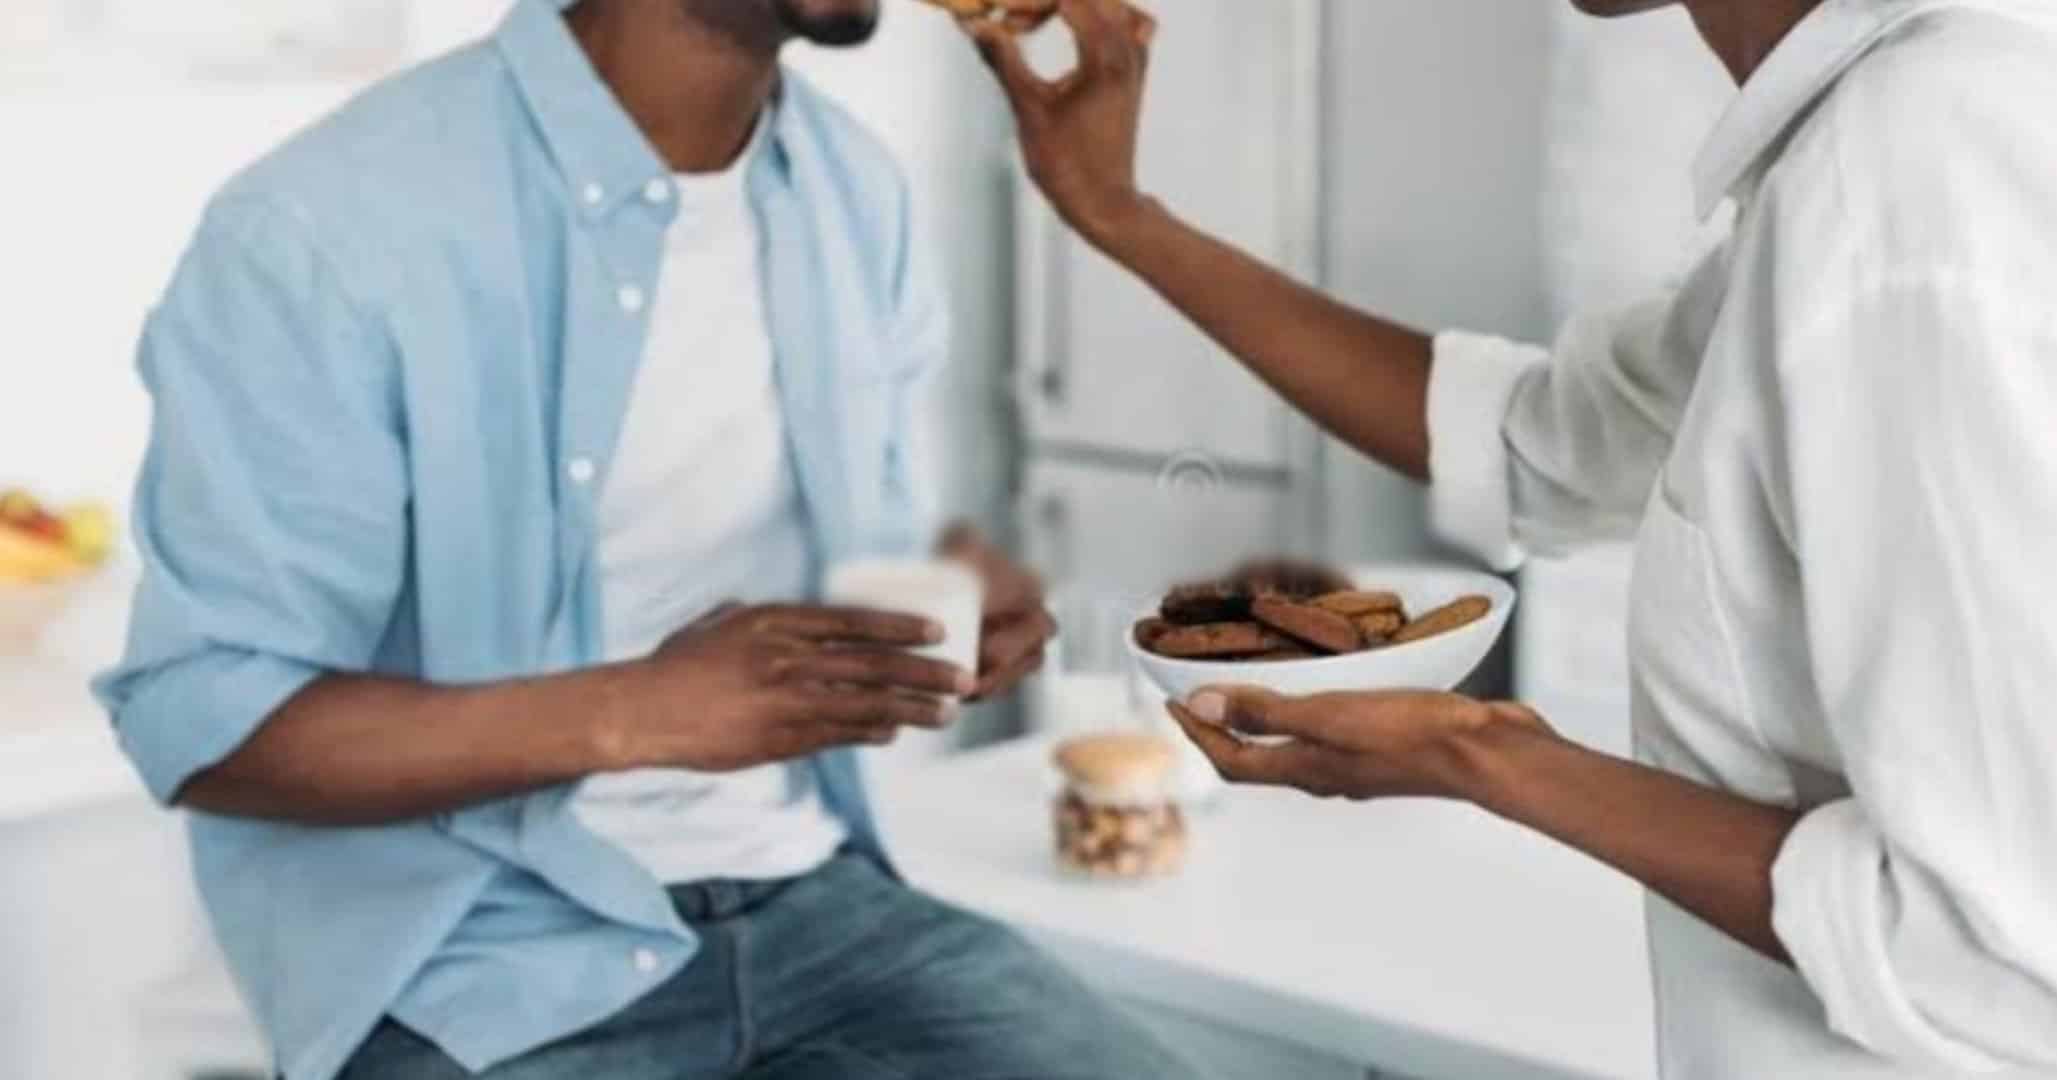 "You may not live longer than 60 years if you marry a woman that cannot cook" – Relationship adviser alleges